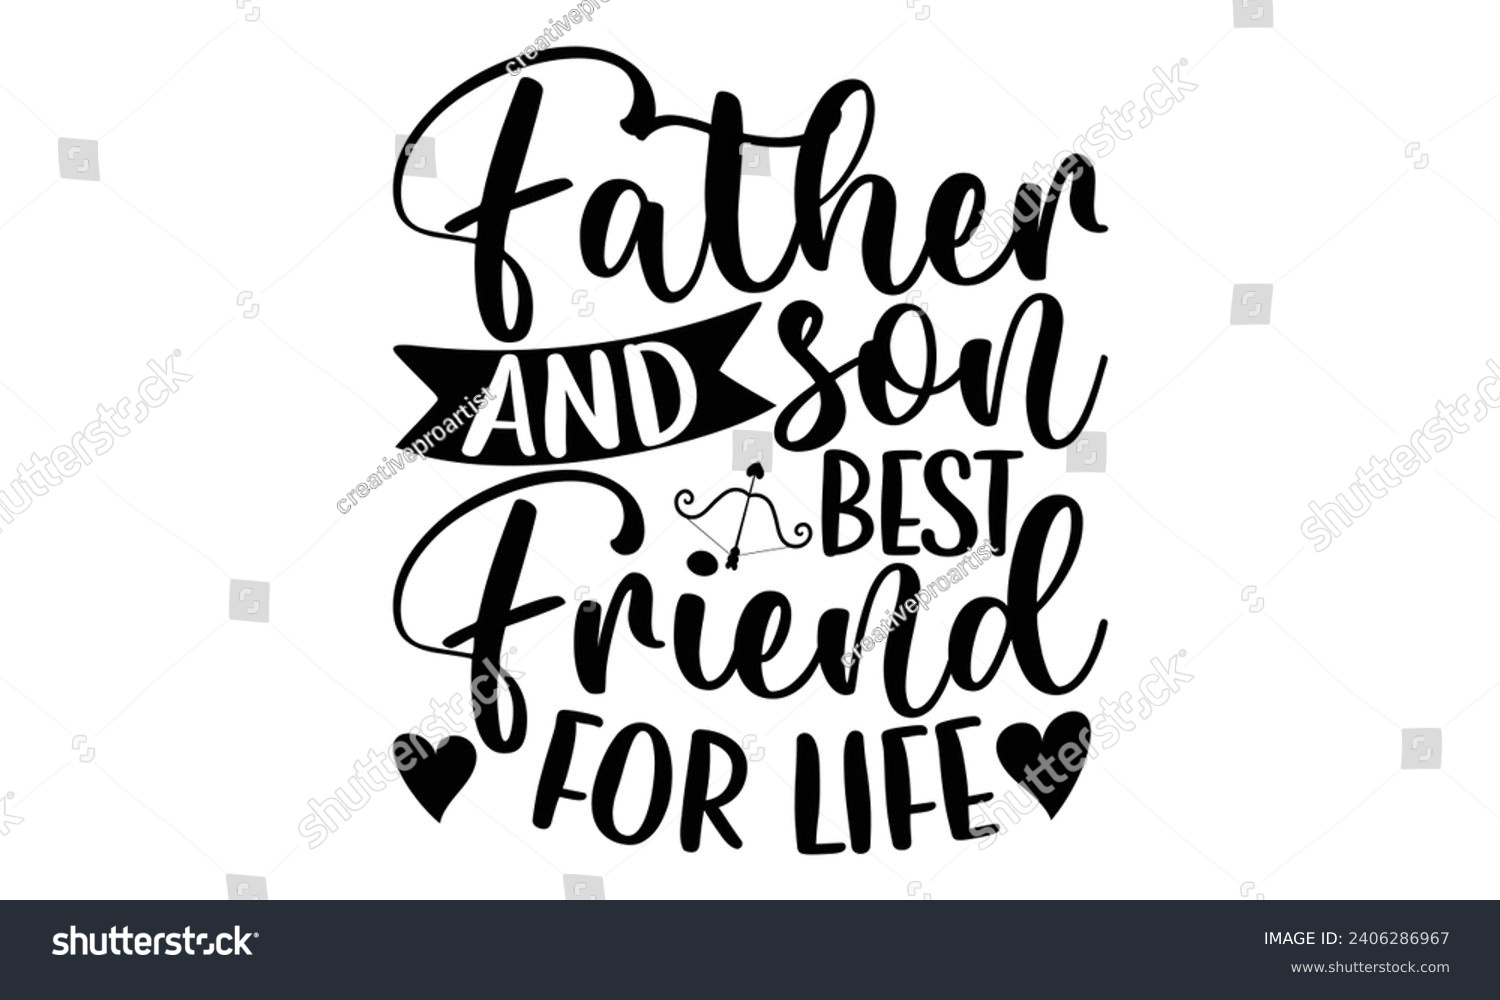 SVG of Father And Son Best Friend For Life- Best friends t- shirt design, Hand drawn vintage illustration with hand-lettering and decoration elements, greeting card template with typography text svg